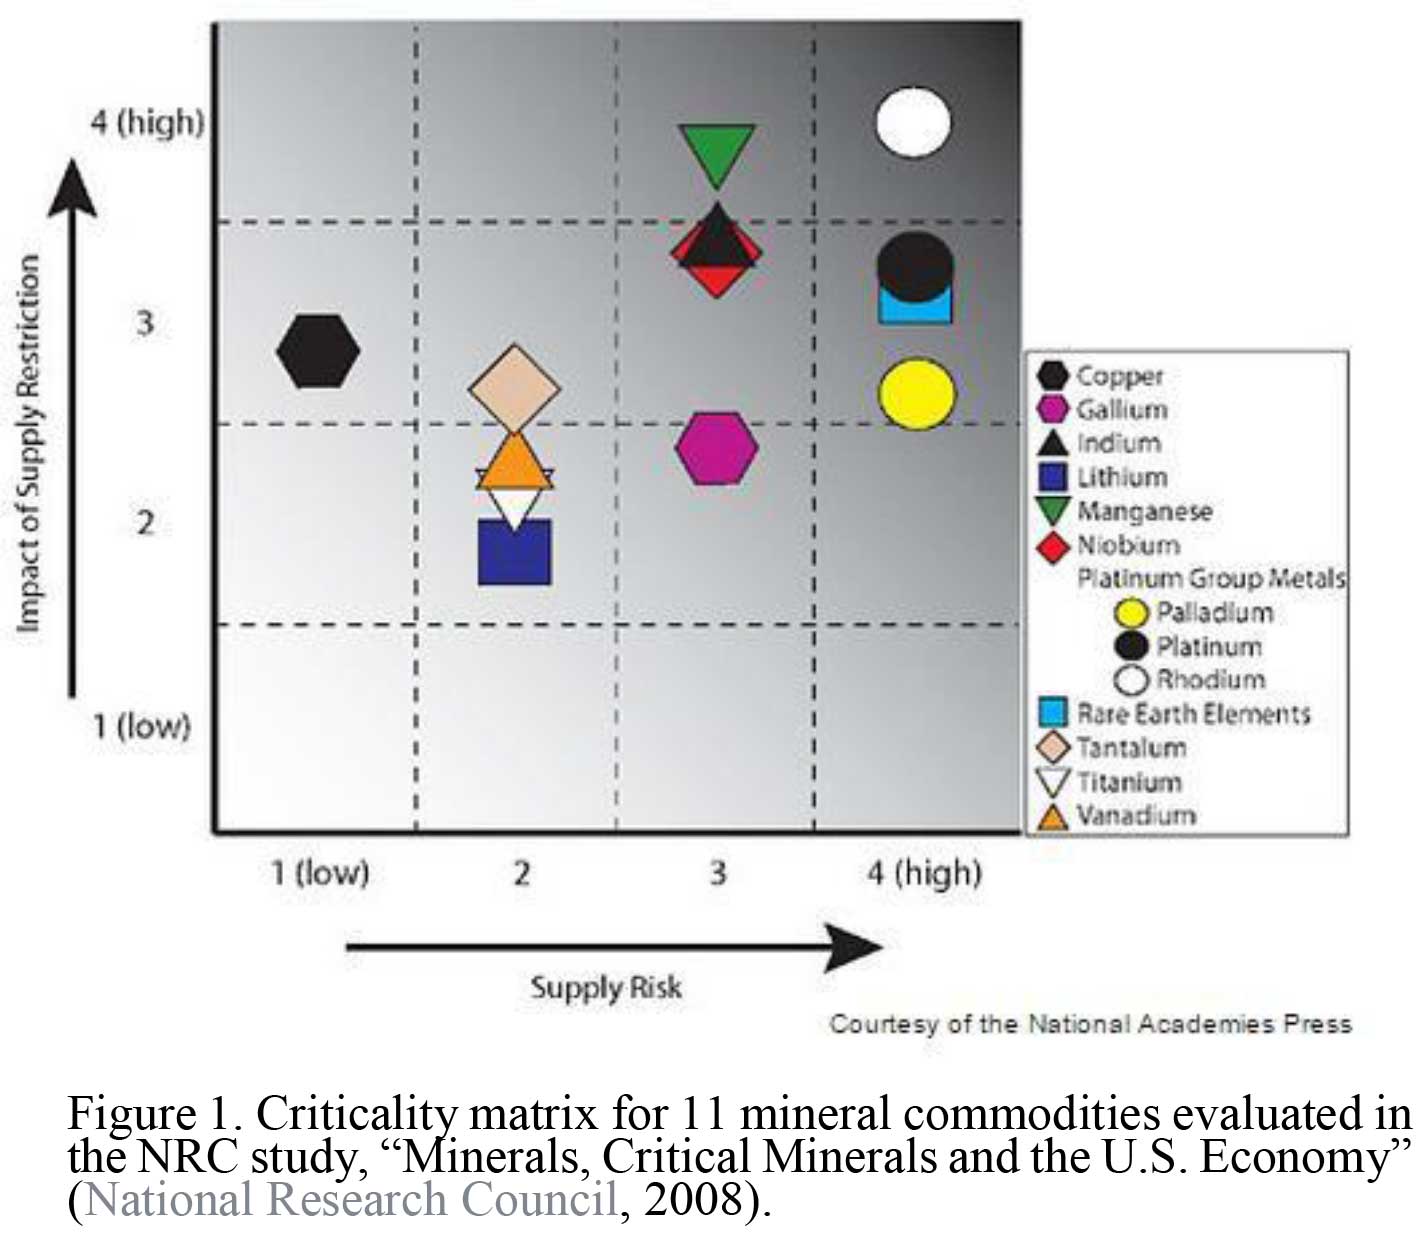 Figure 1. Criticality Matrix for 11 mineral commodities evaluated in the NRC study, Minerals Critical Minerals, and the US Economy